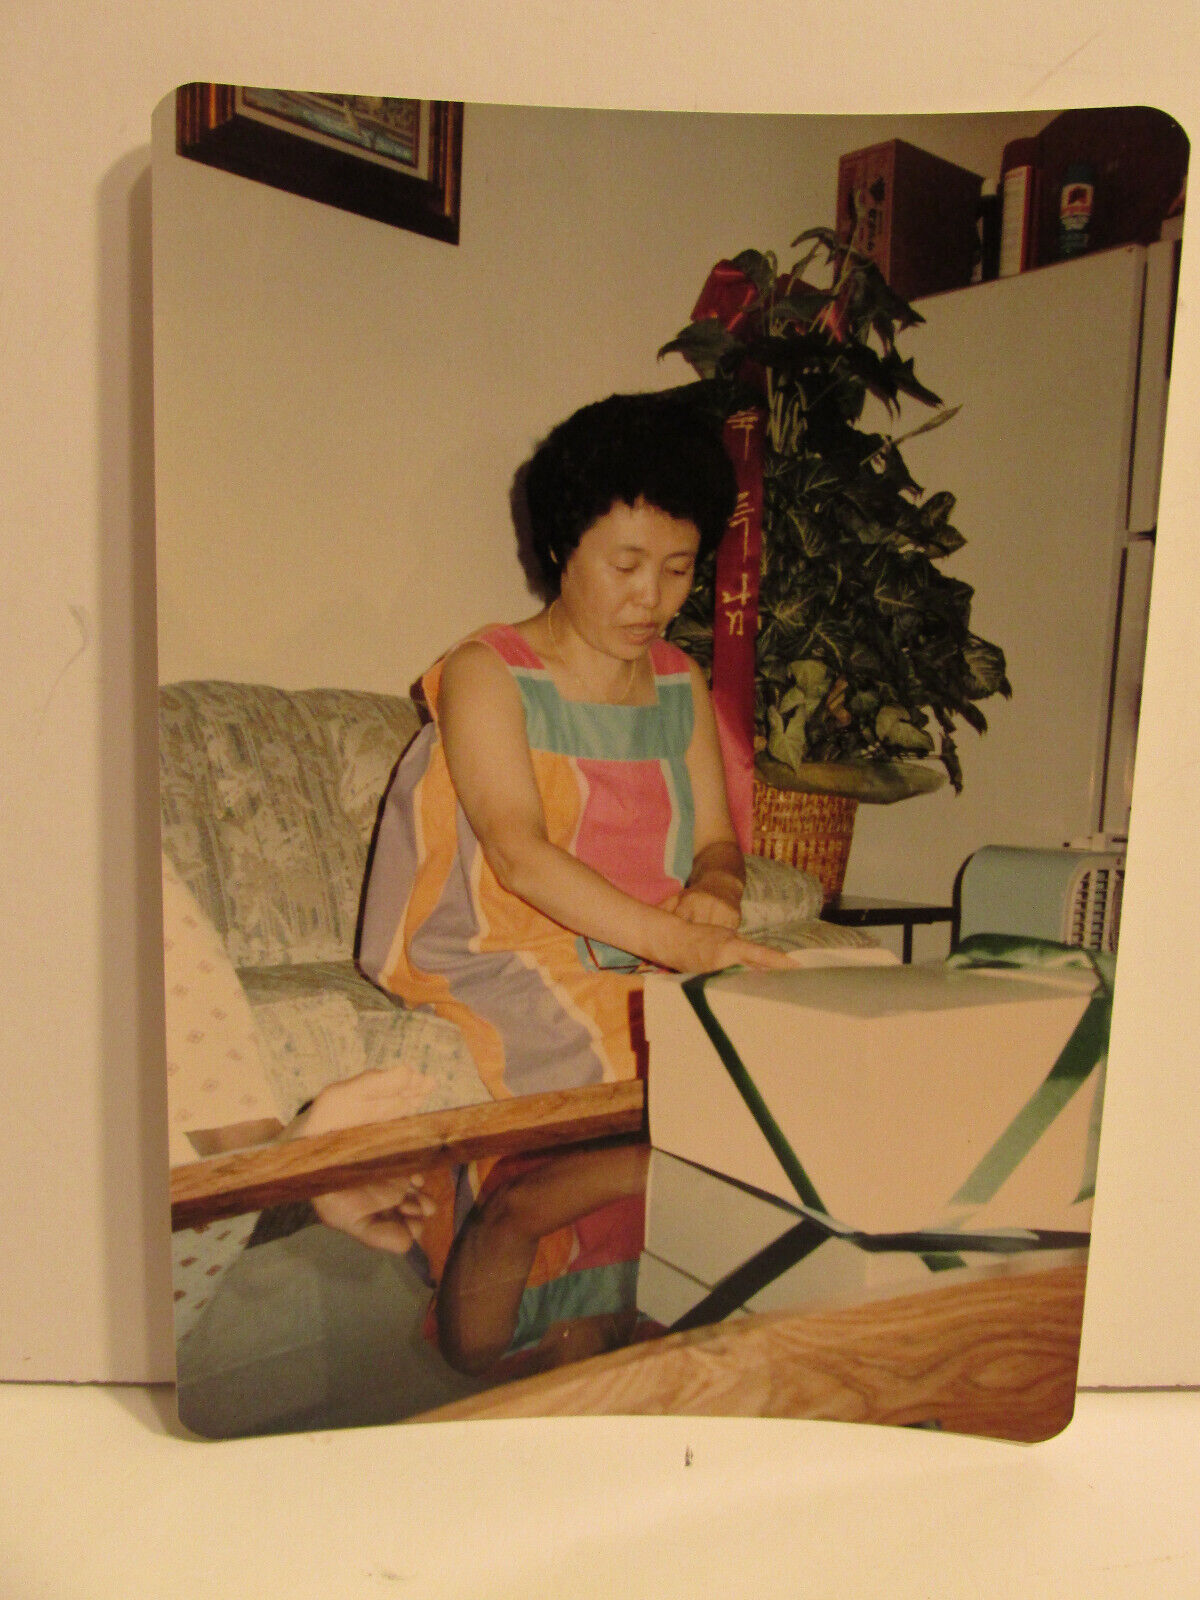 1980S VINTAGE FOUND PHOTOGRAPH COLOR ART OLD PHOTO KOREAN ASIAN WOMAN OPENS GIFT